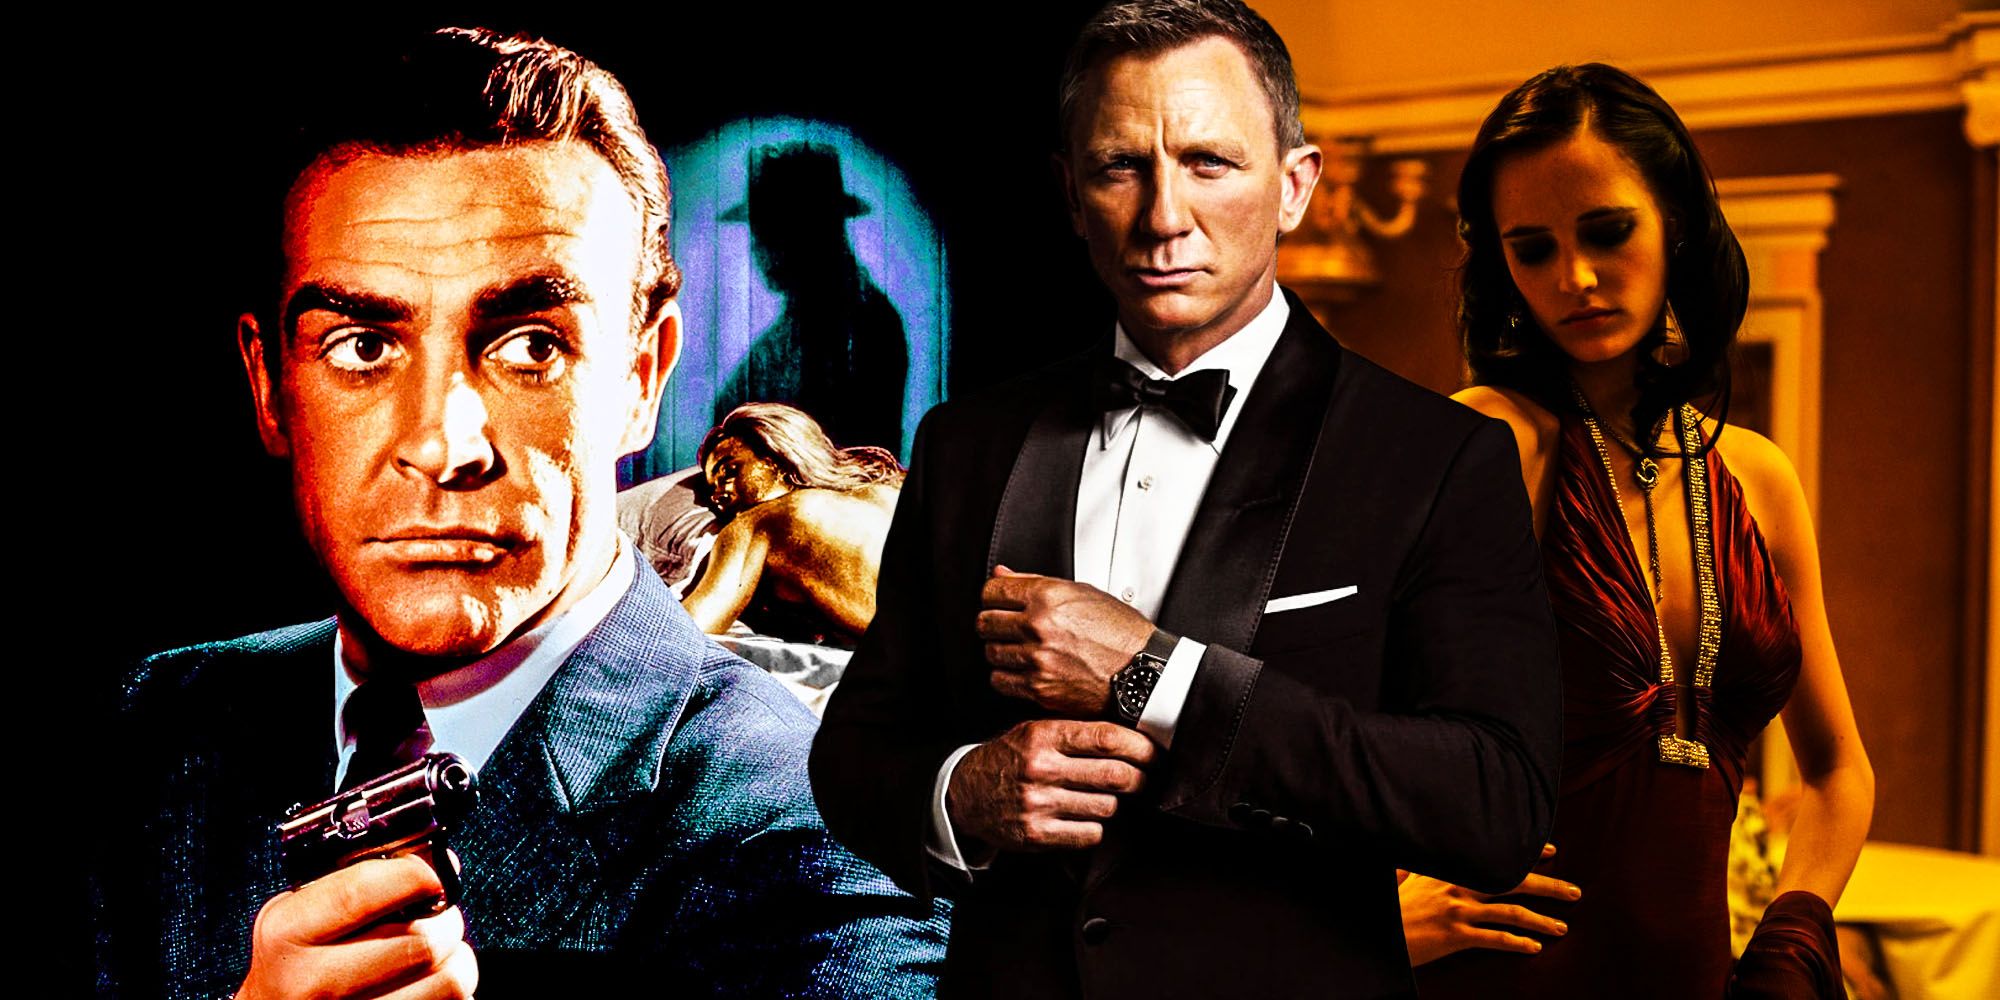 Daniel Craig Is Right About James Bond’s No Time To Die Ending - News